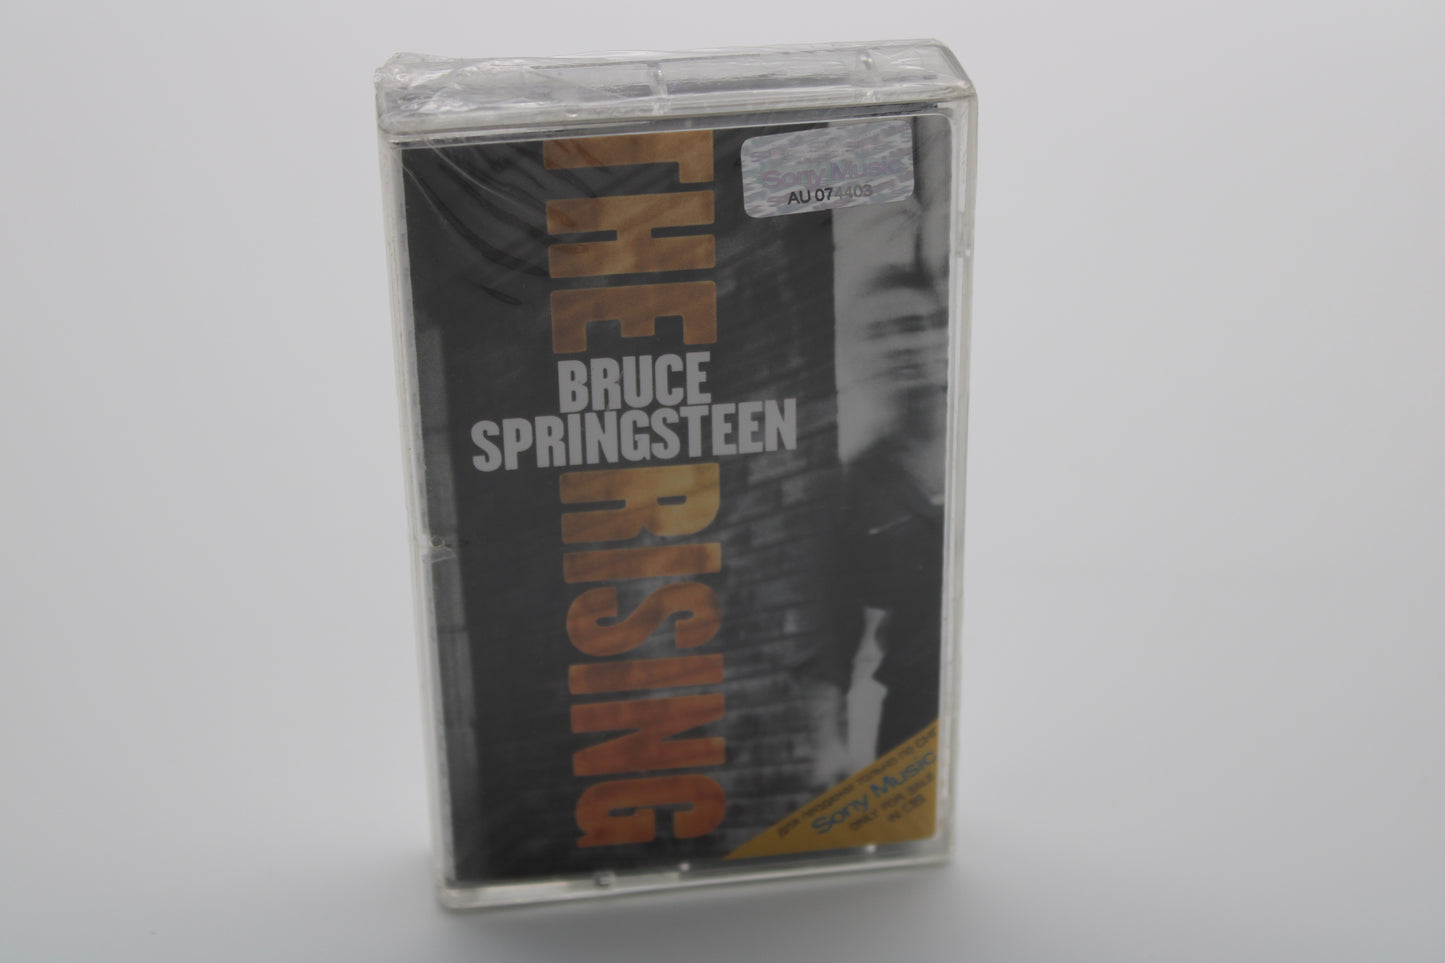 Bruce Springsteen SEALED - The Rising - Original Sealed 2002 Cassette - Russian Import